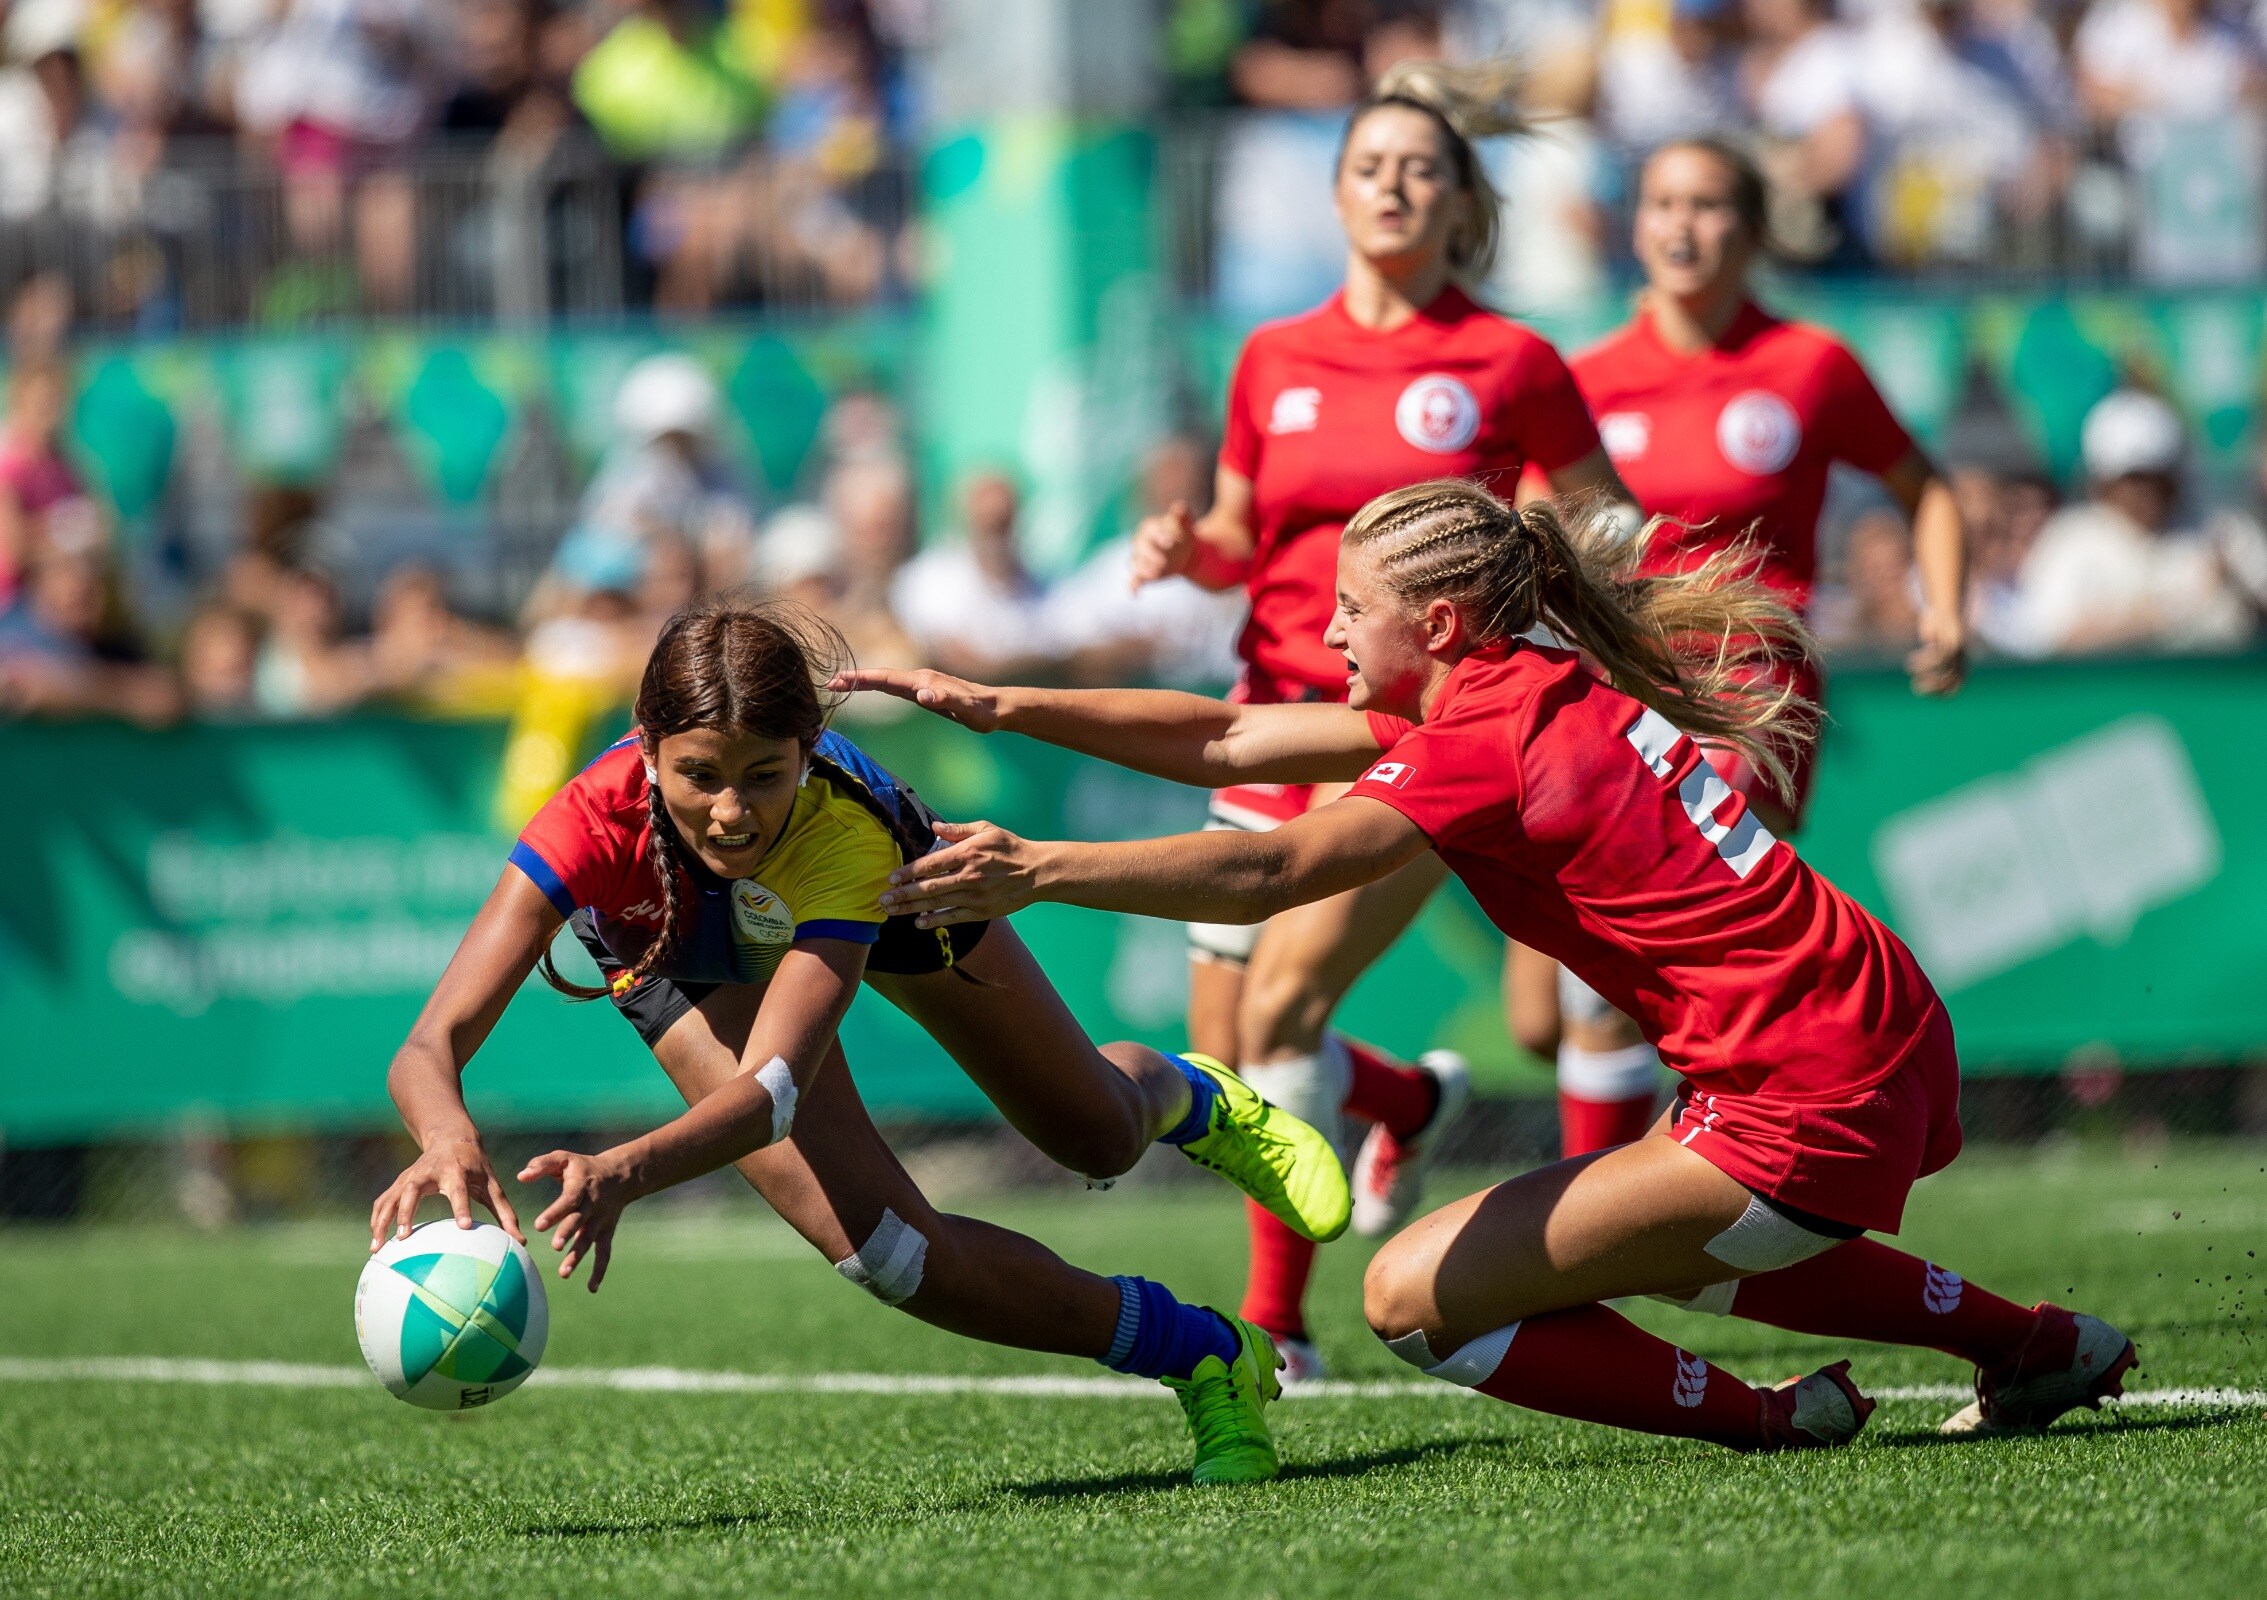 Buenos Aires 2018 - Rugby Sevens - Women’s Tournament